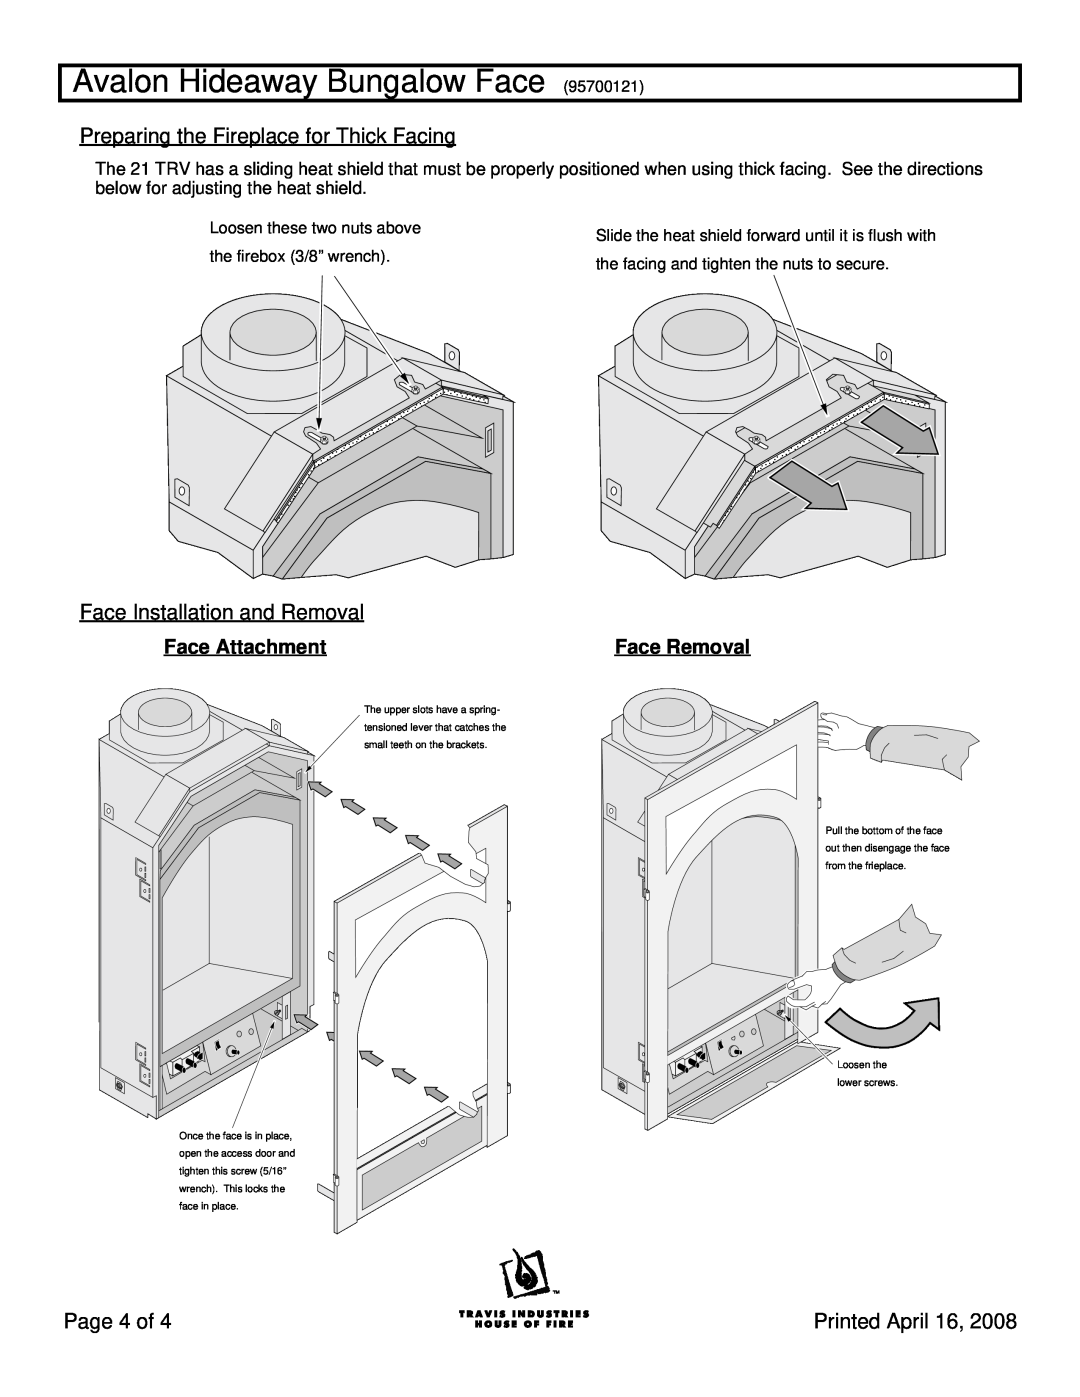 Avalon Stoves 21 TRV Preparing the Fireplace for Thick Facing, Face Installation and Removal, Page 4 of, Face Attachment 